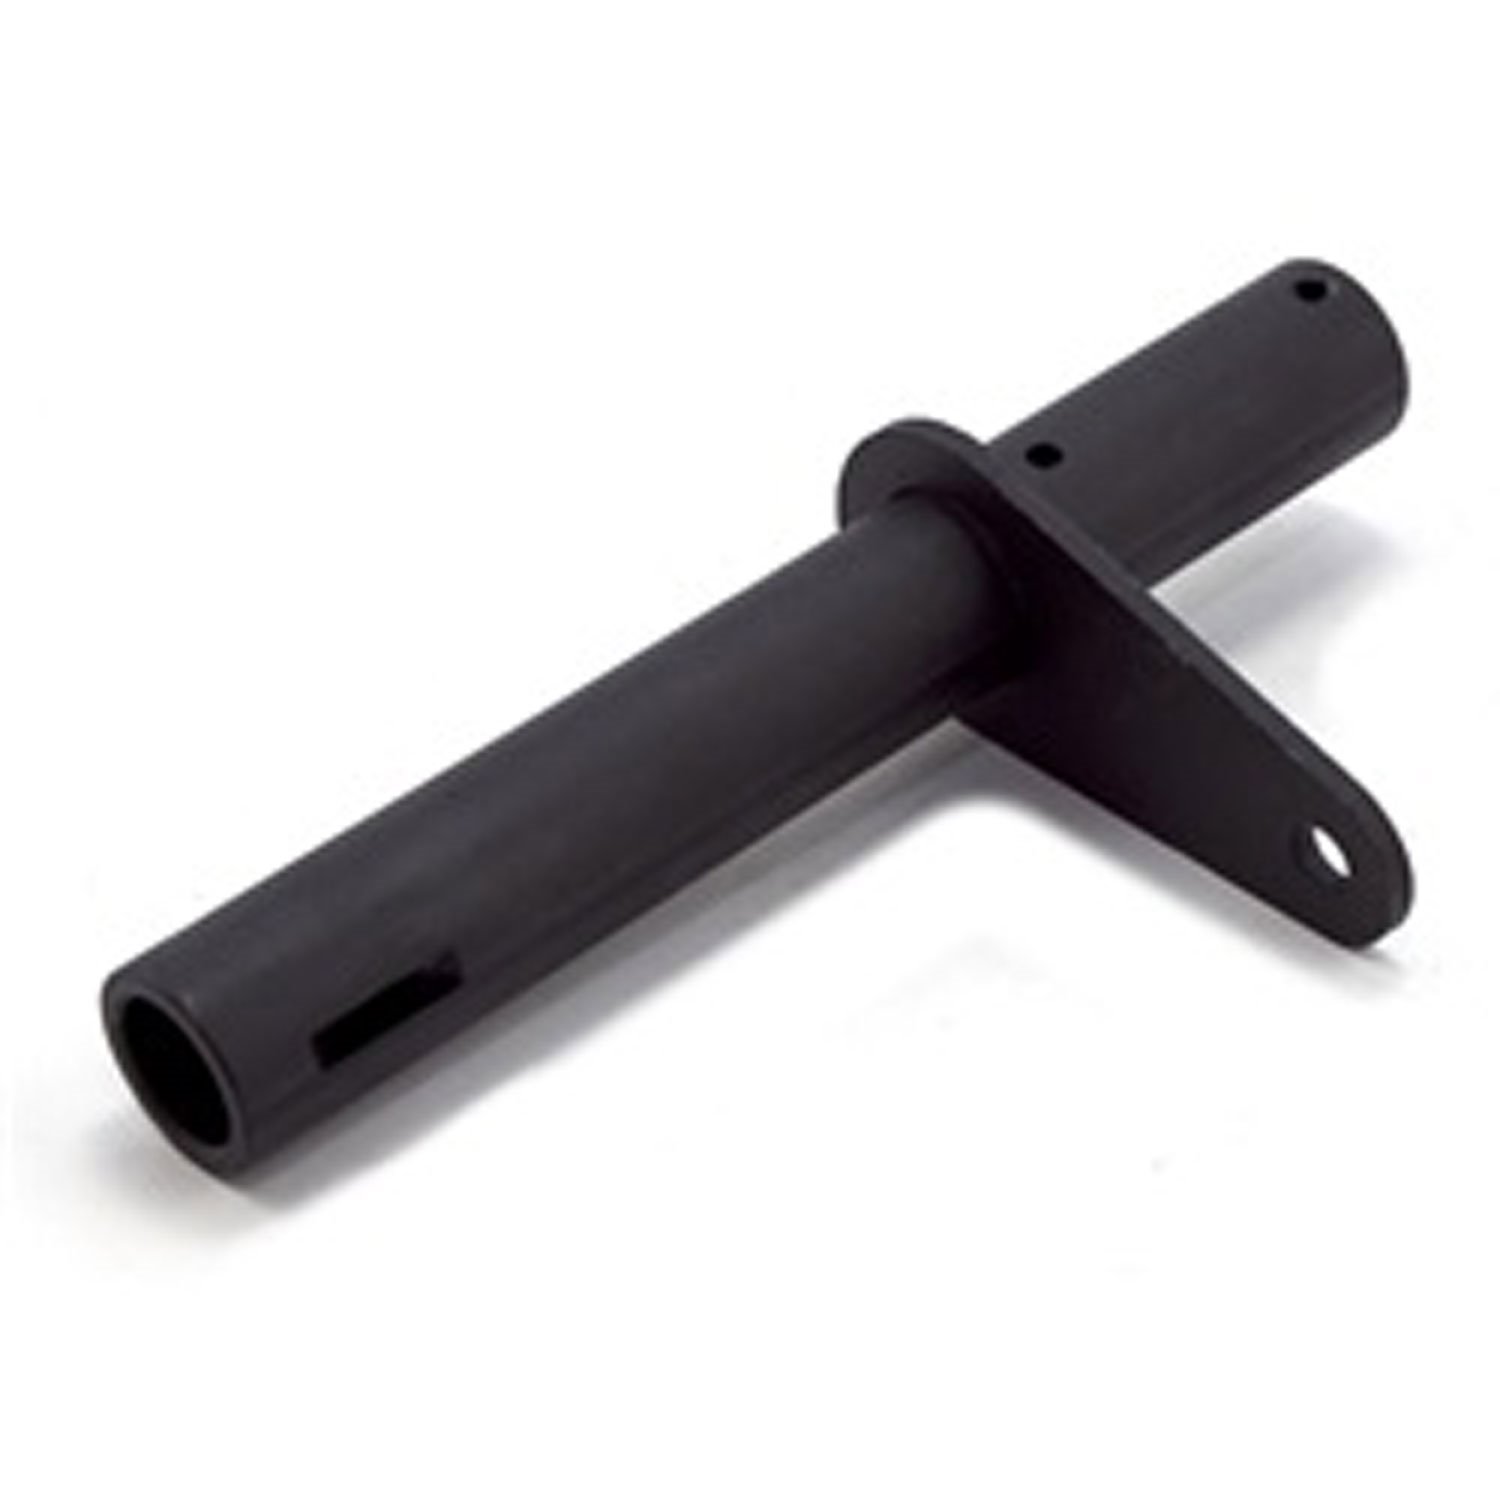 This reproduction brake and clutch pedal cross shaft fits 41-71 Willys Ford and Jeep models.